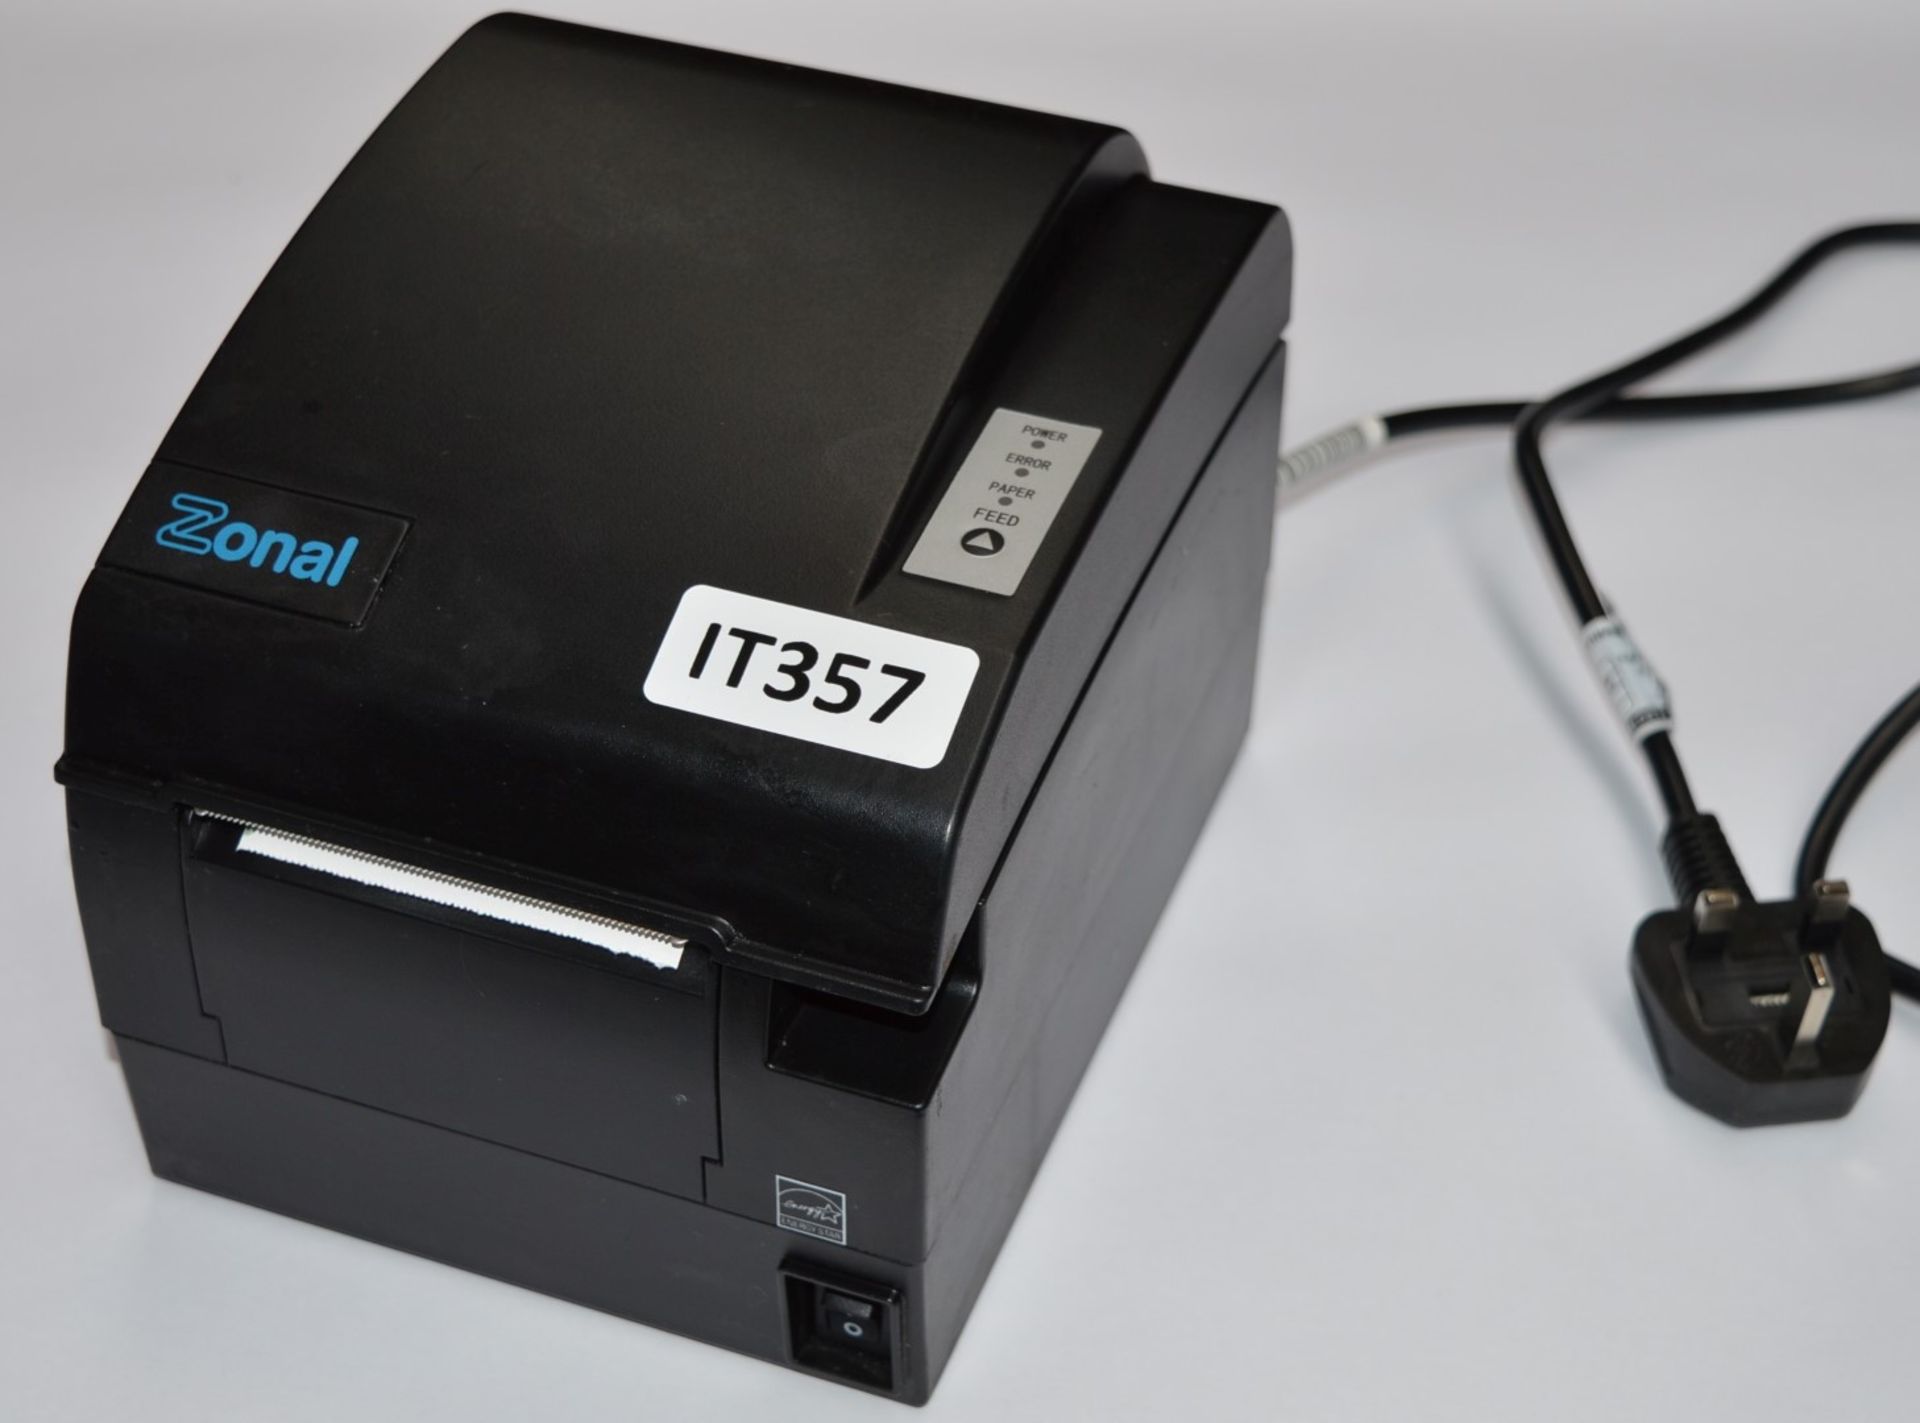 1 x Zonal BTP-R580II Thermal Receipt Printer - Ideal For Use in Hospitality, Retail and Leisure - Image 2 of 6